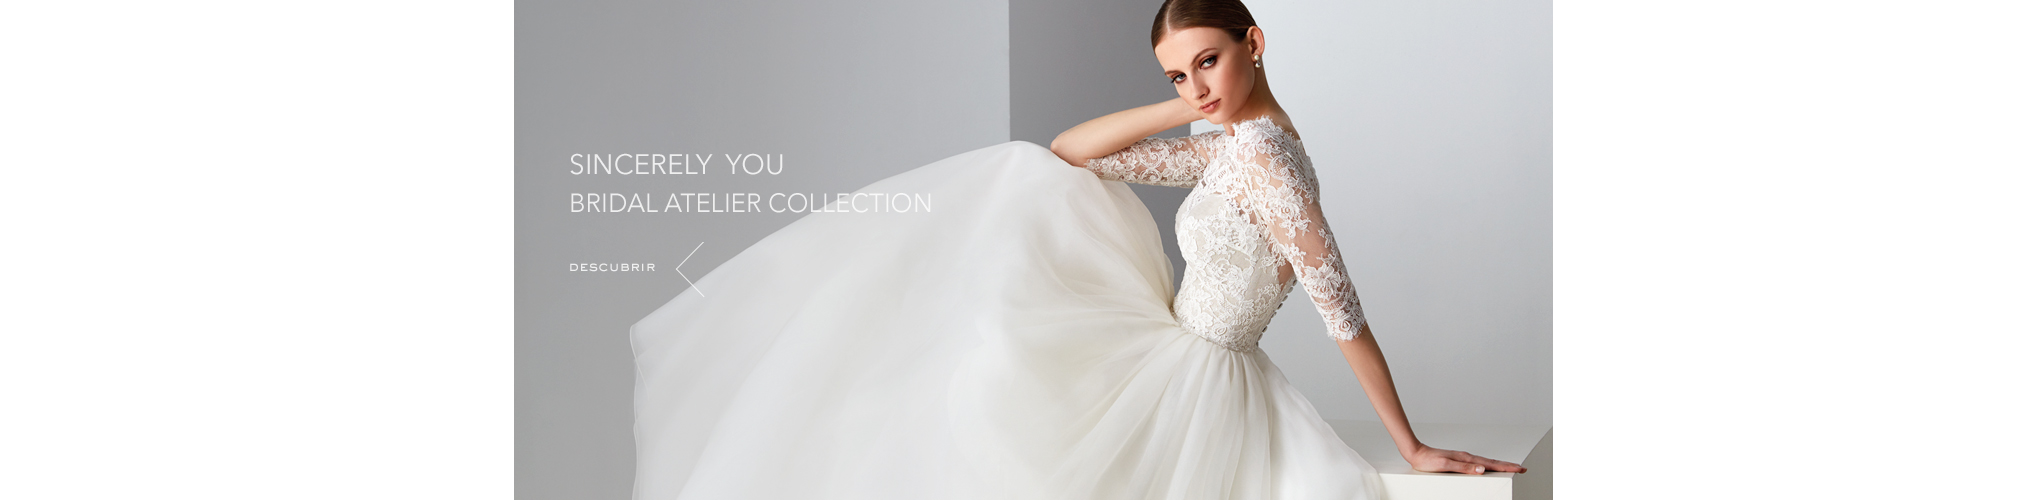 SINCERELY YOU / ATELIER BRIDAL COLLECTION